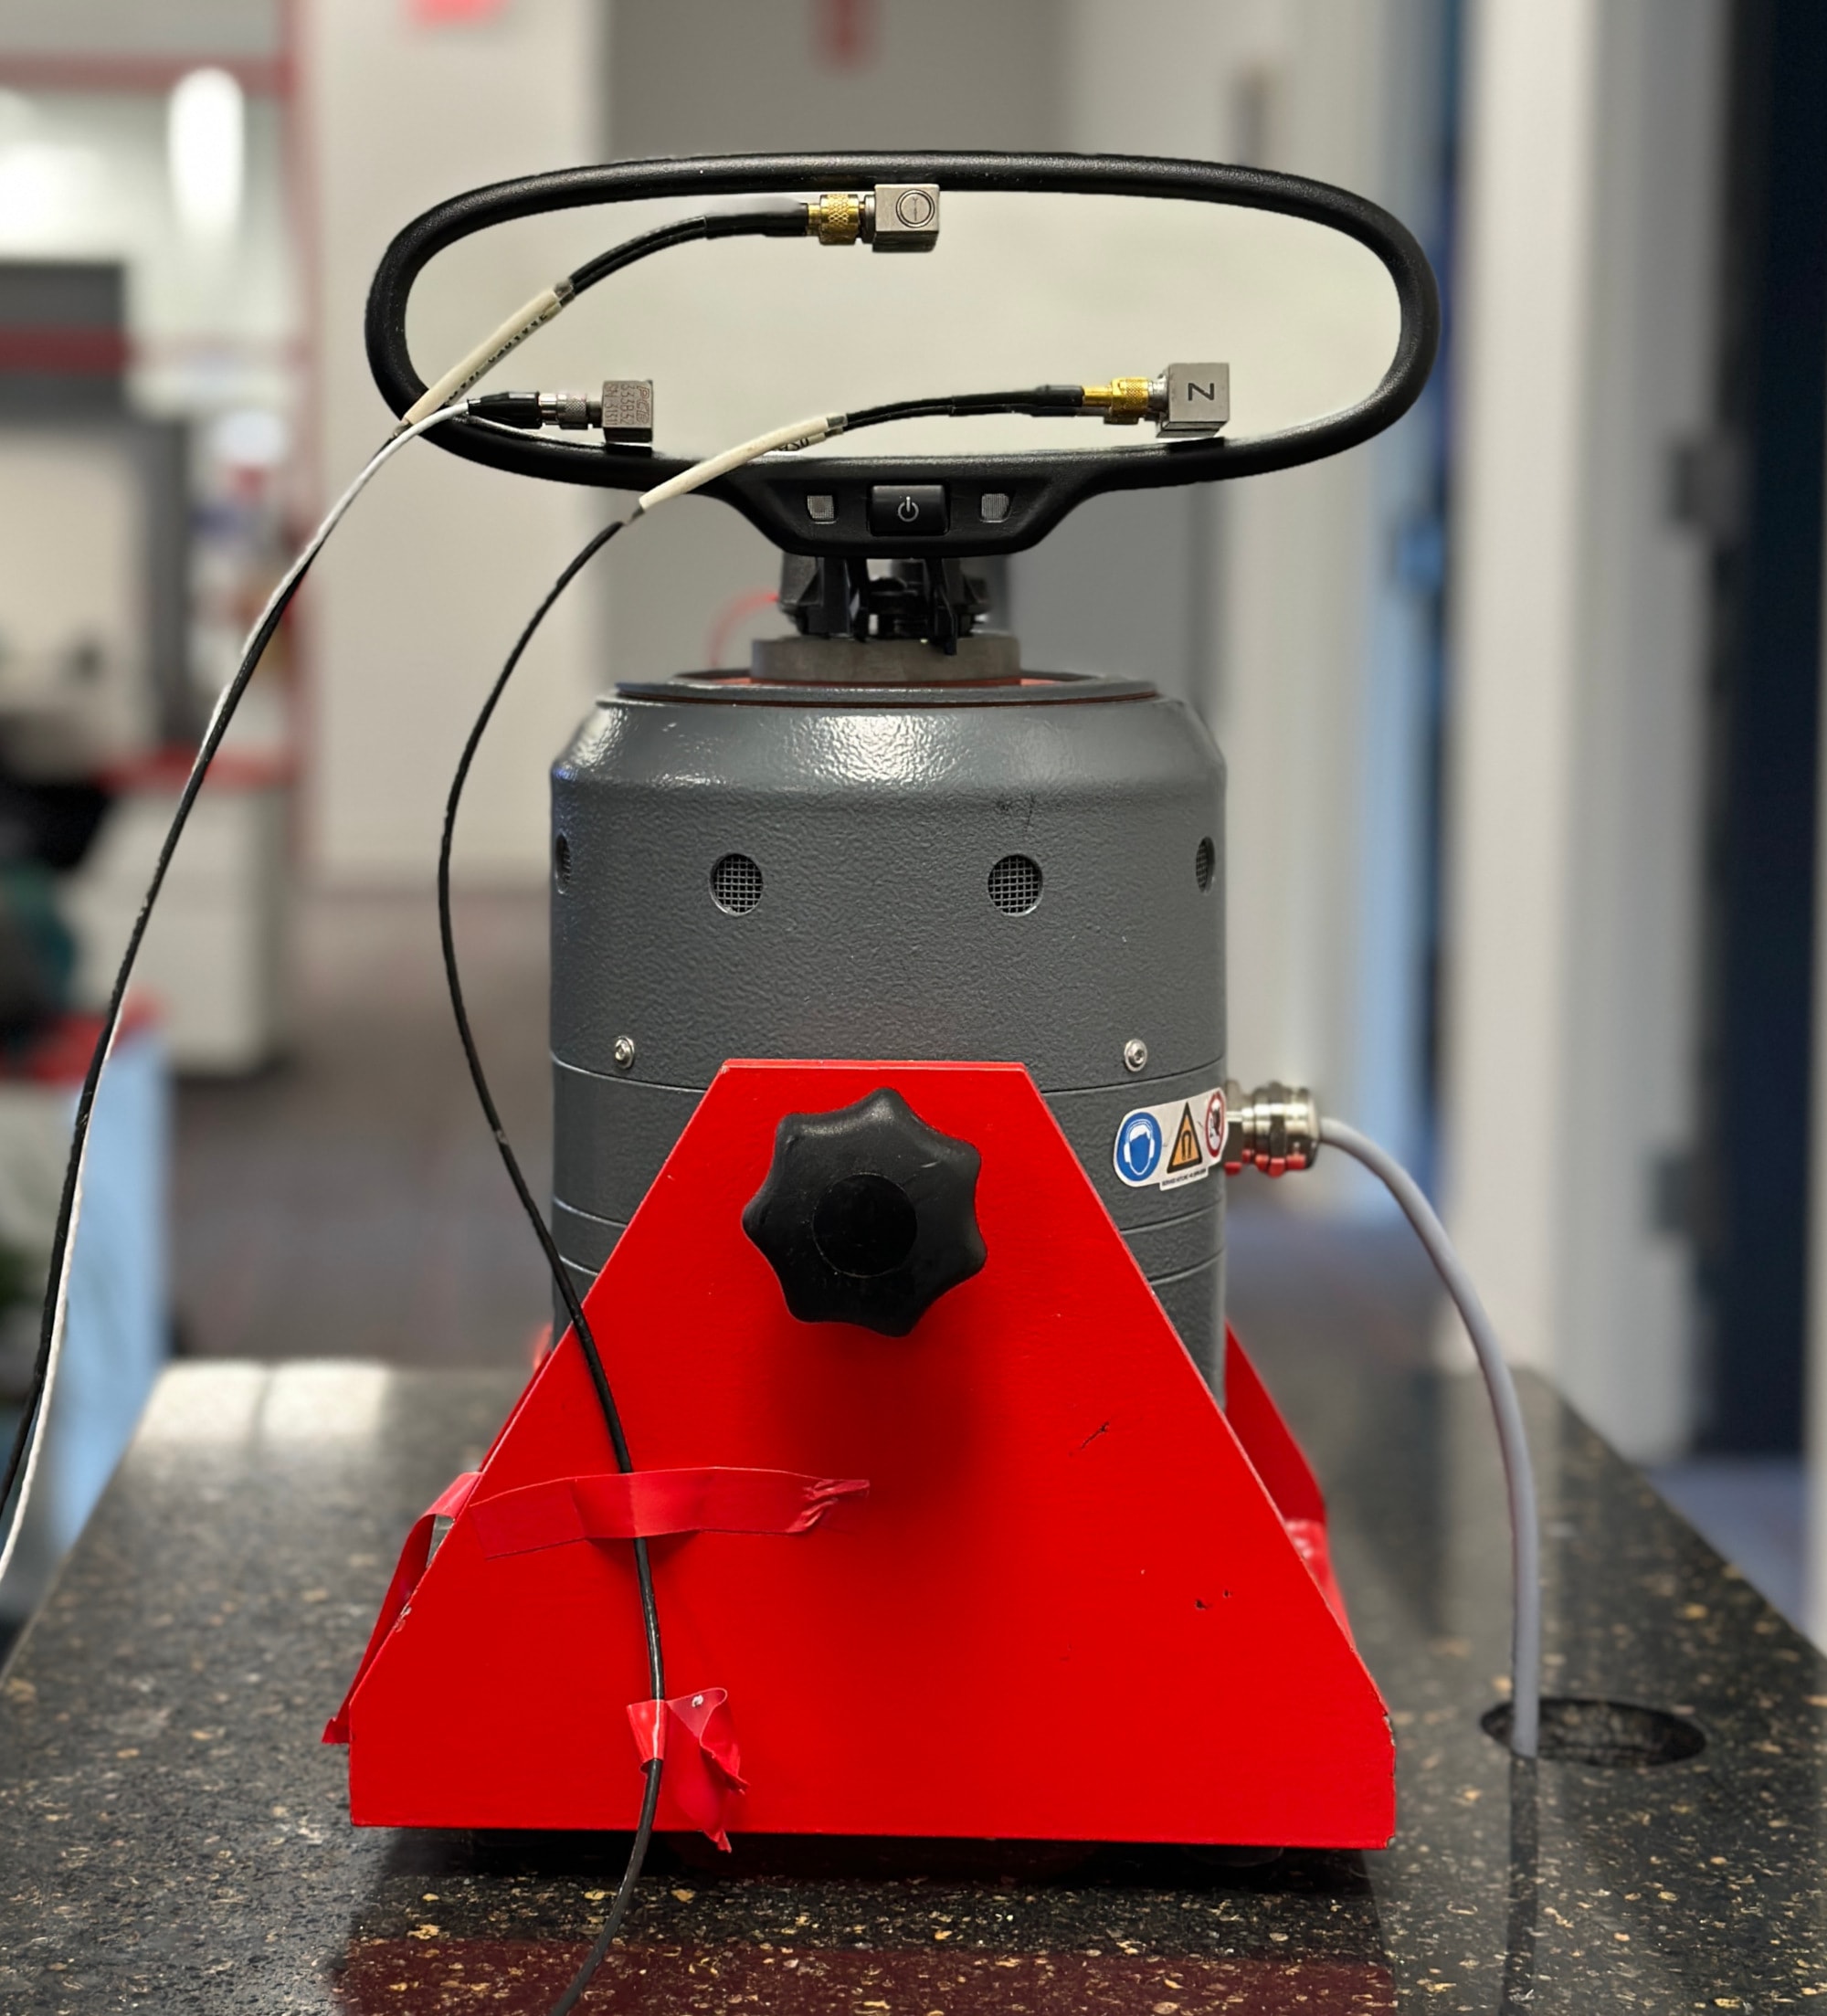 A tabletop shaker setup with an internal rearview mirror mounted to the shaker head and three accelerometers mounted to the mirror lens in a triangle formation.